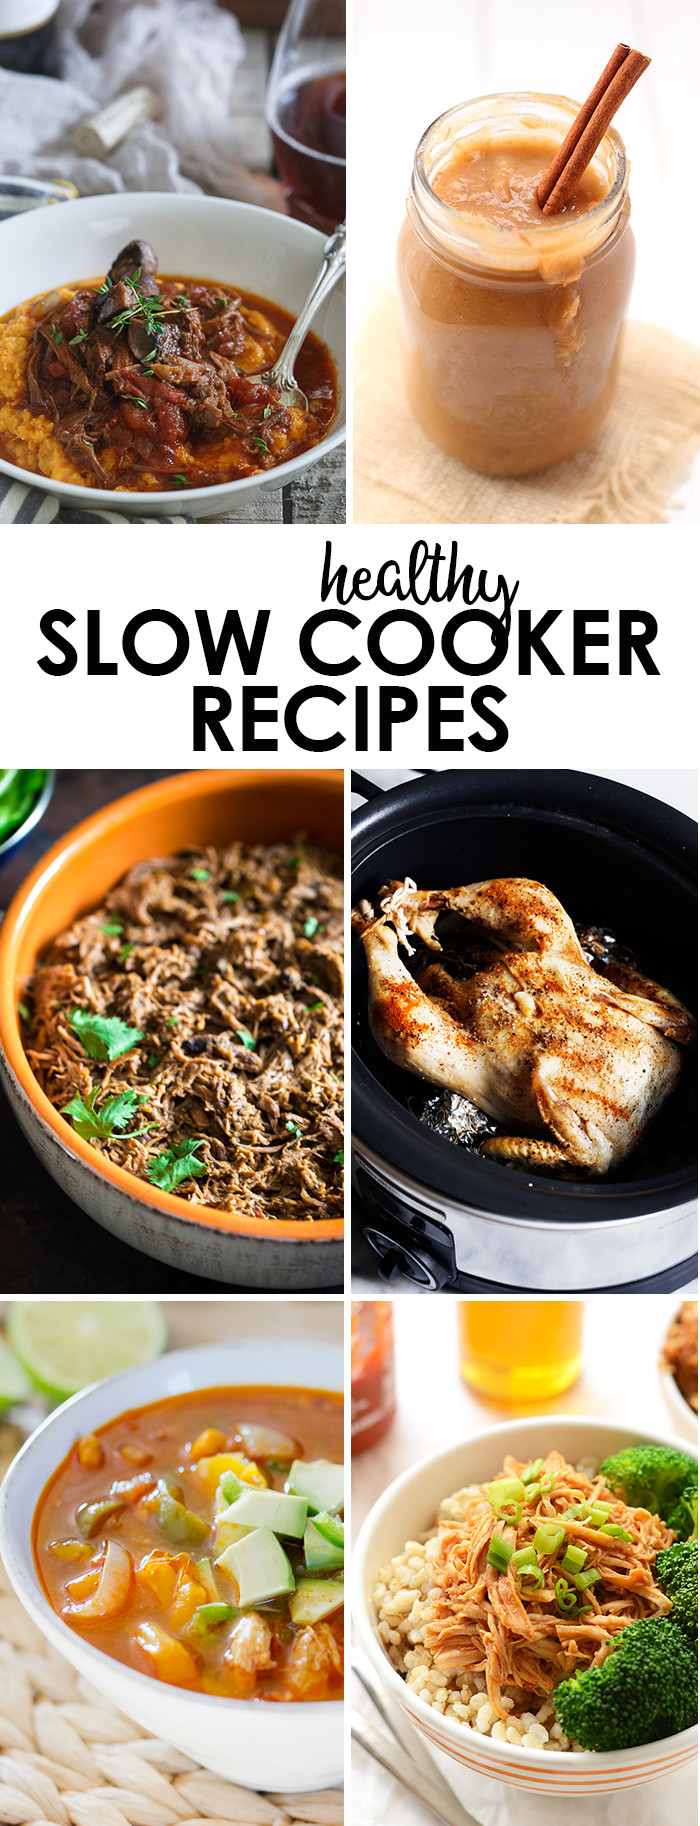 Easy Healthy Slow Cooker Recipes
 5 Ingre nt Honey Sriracha Slow Cooker Chicken Fit